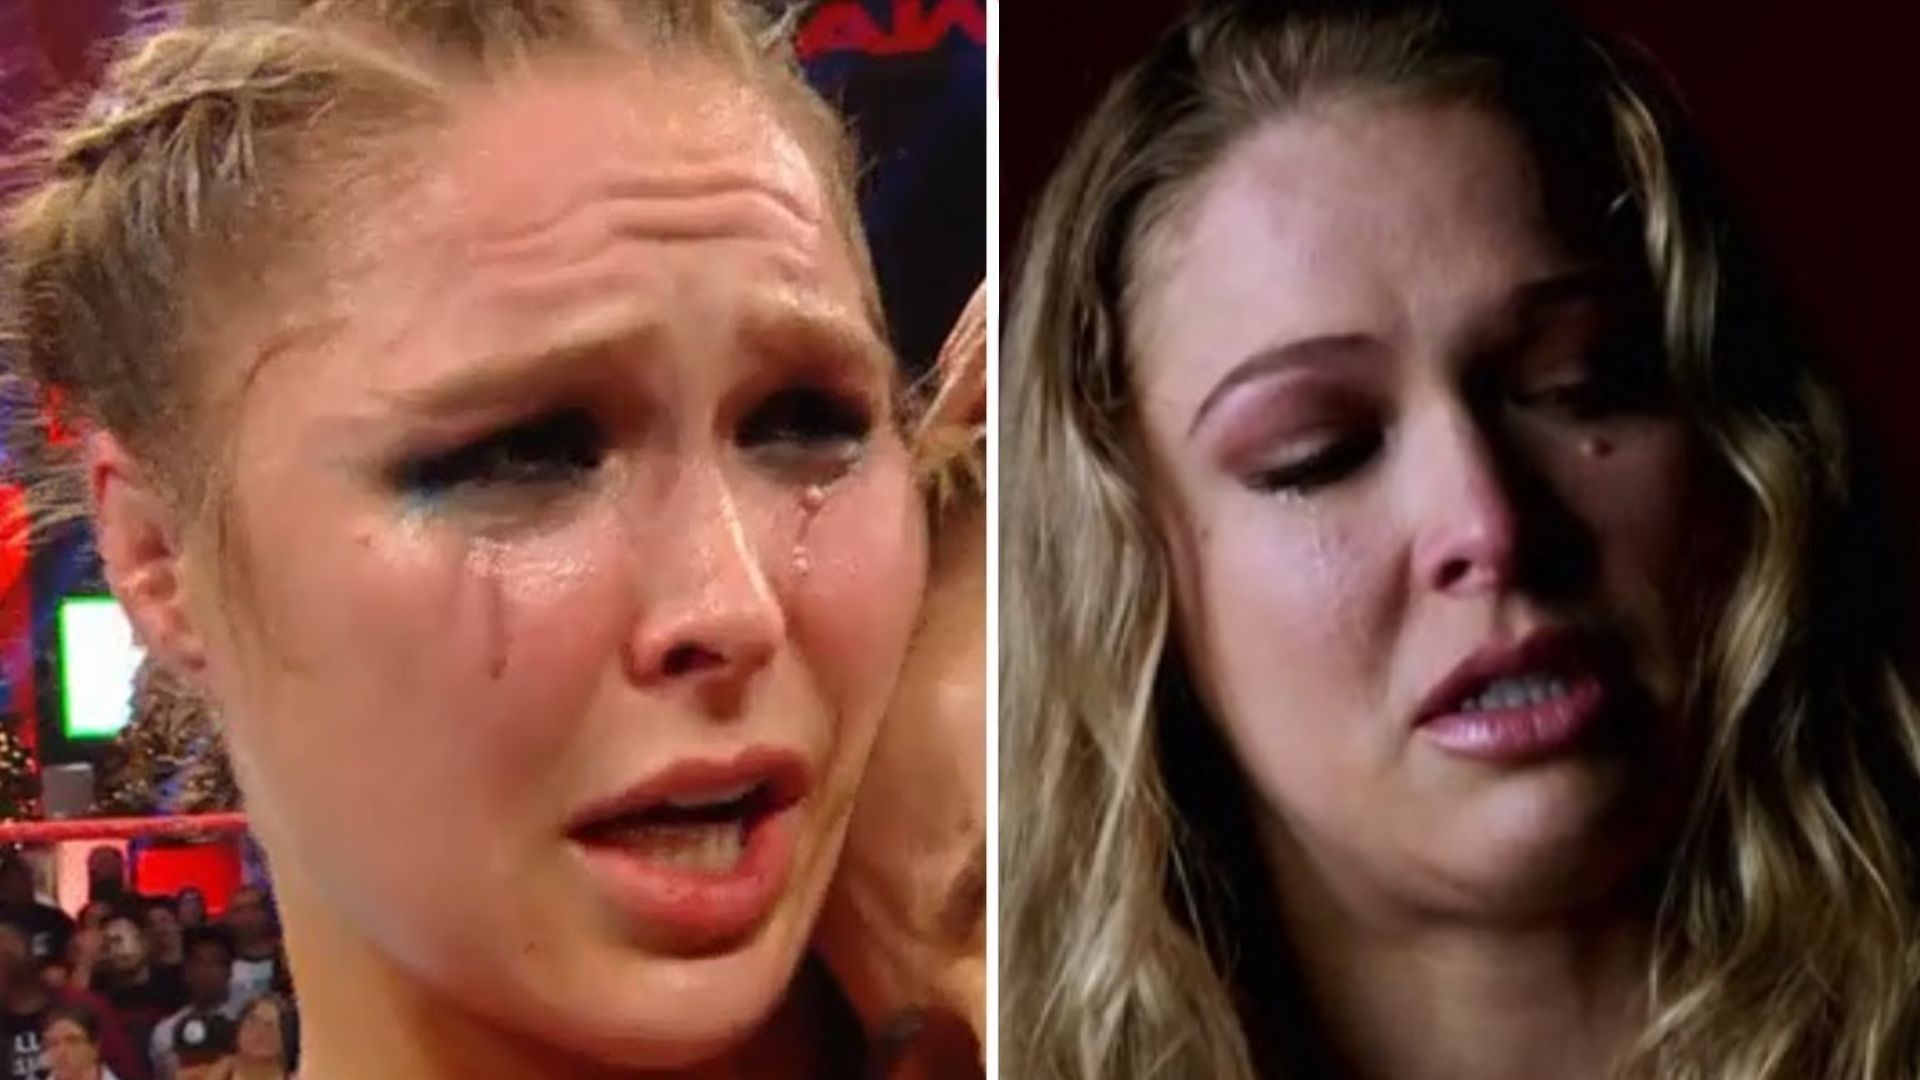 It was an emotional night on RAW this week